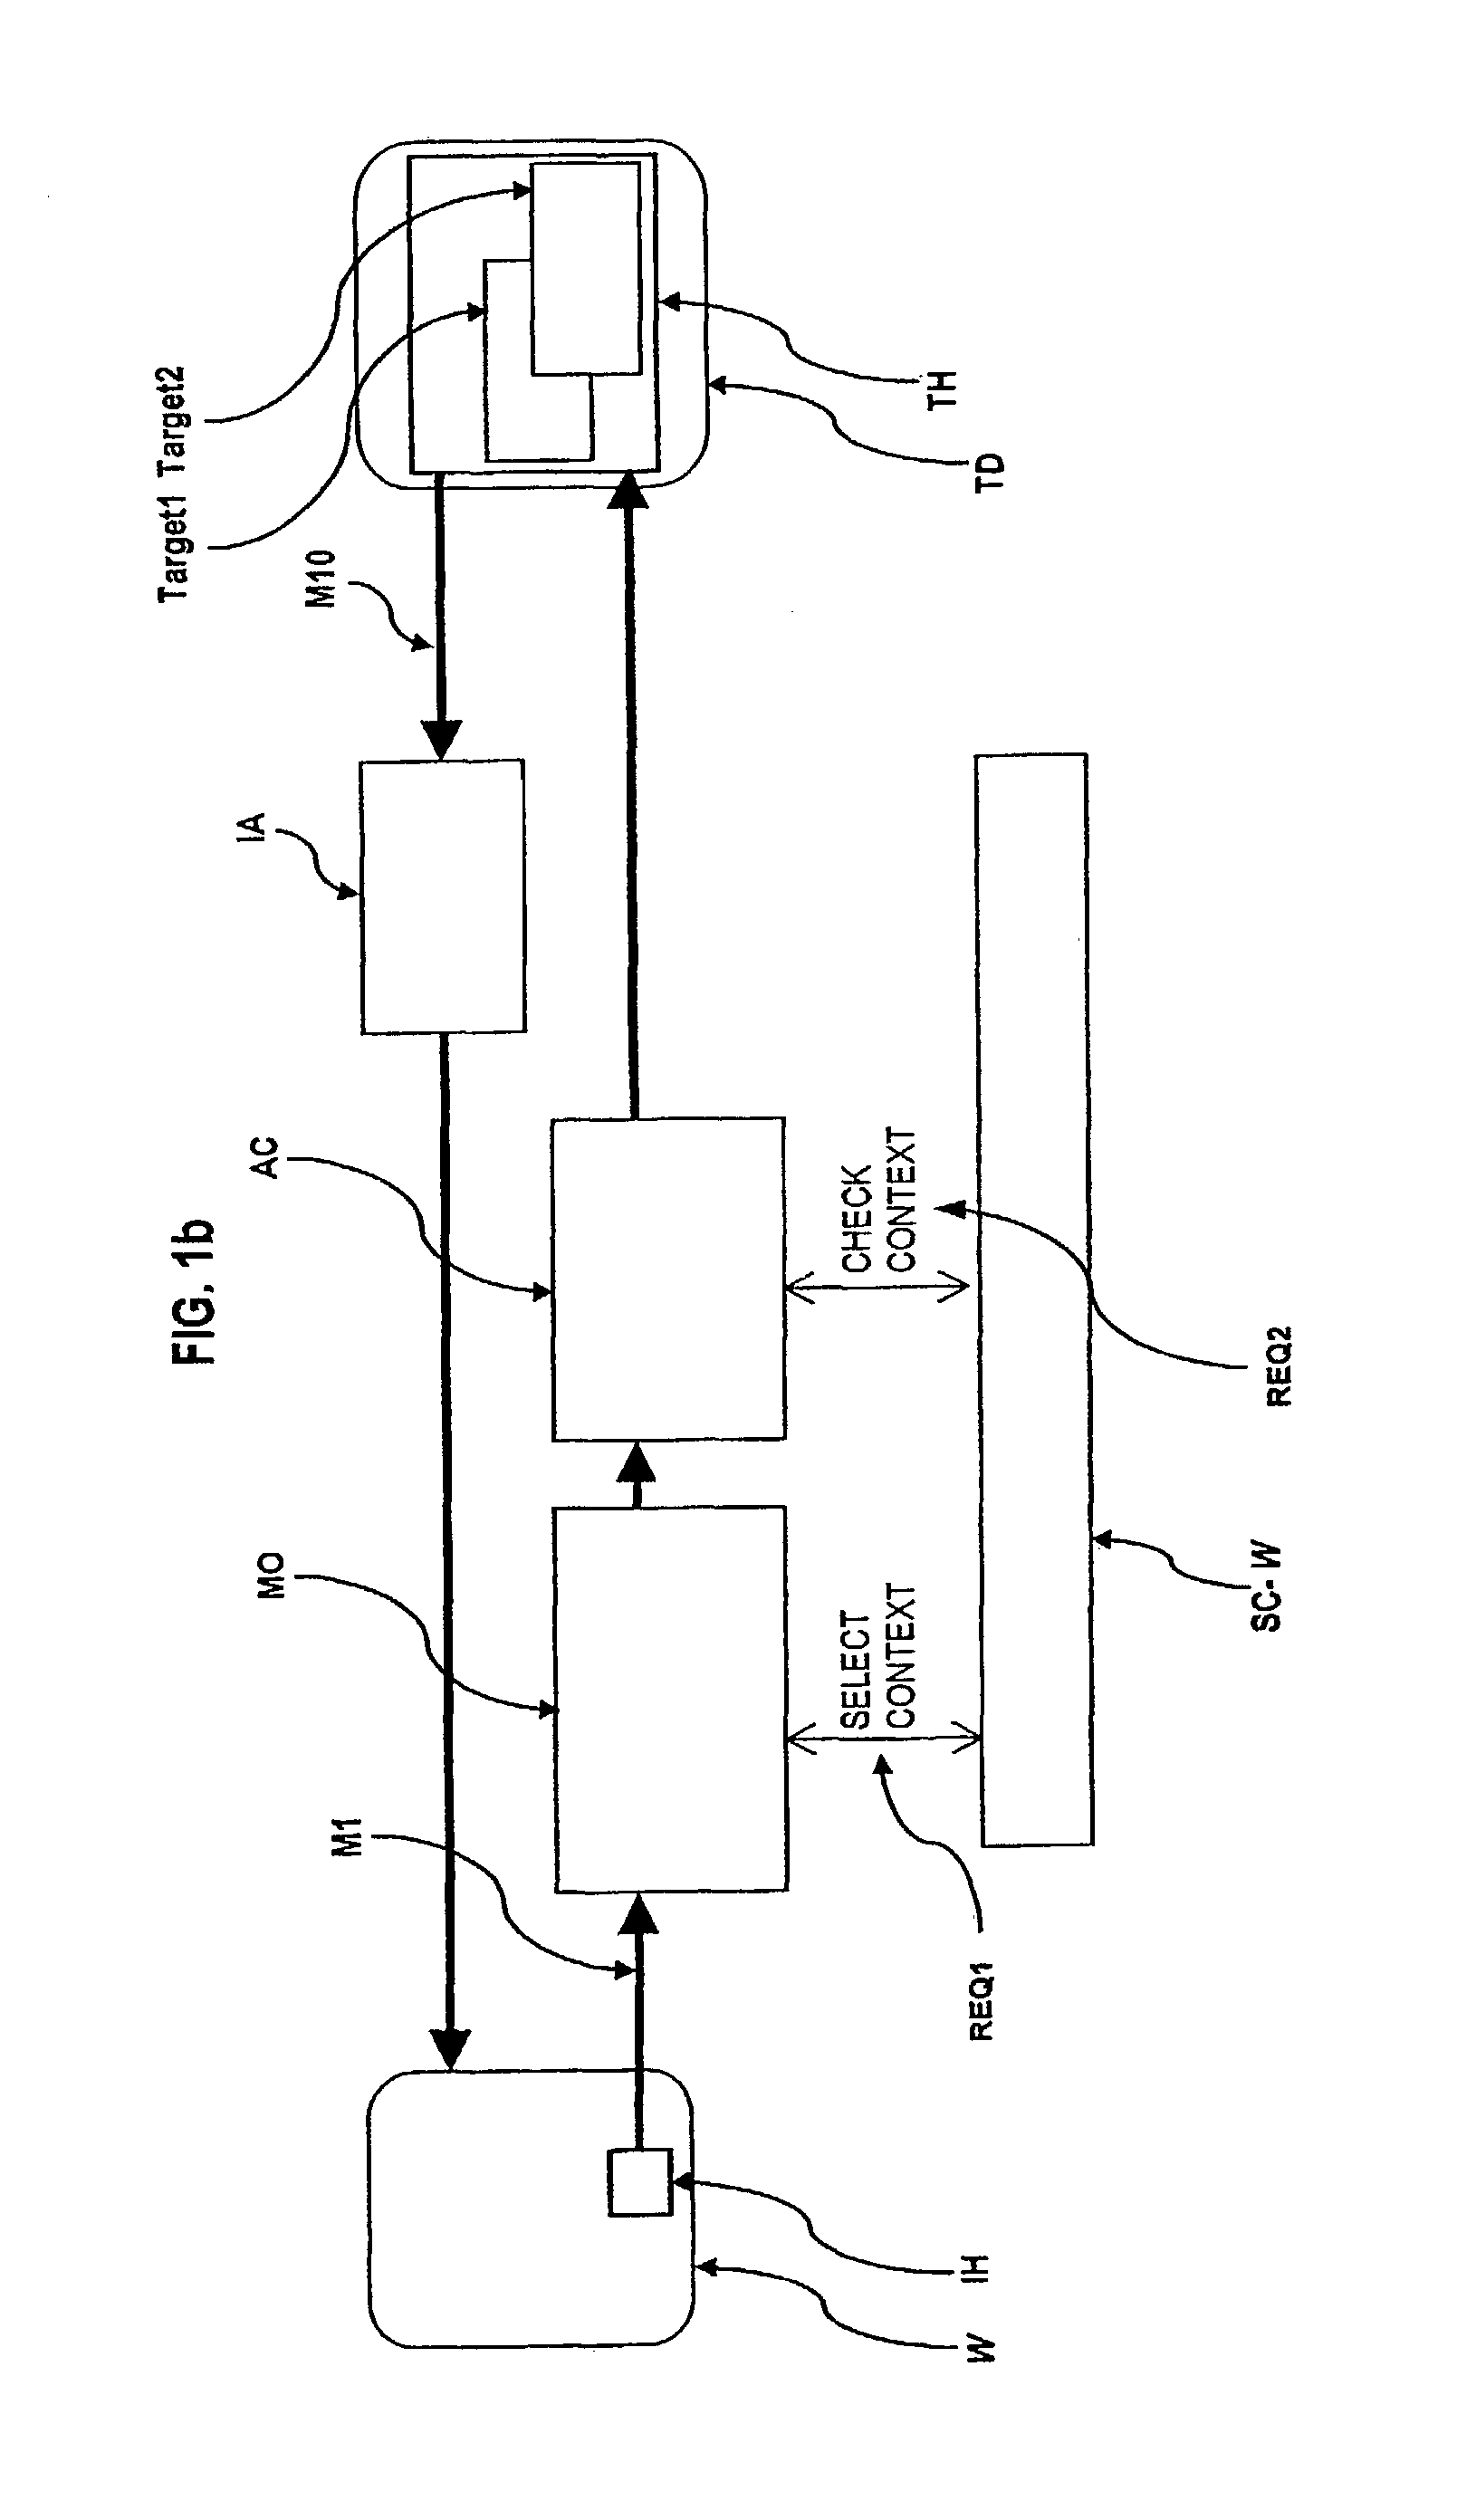 Method and system for session based authorization and access control for networked application objects